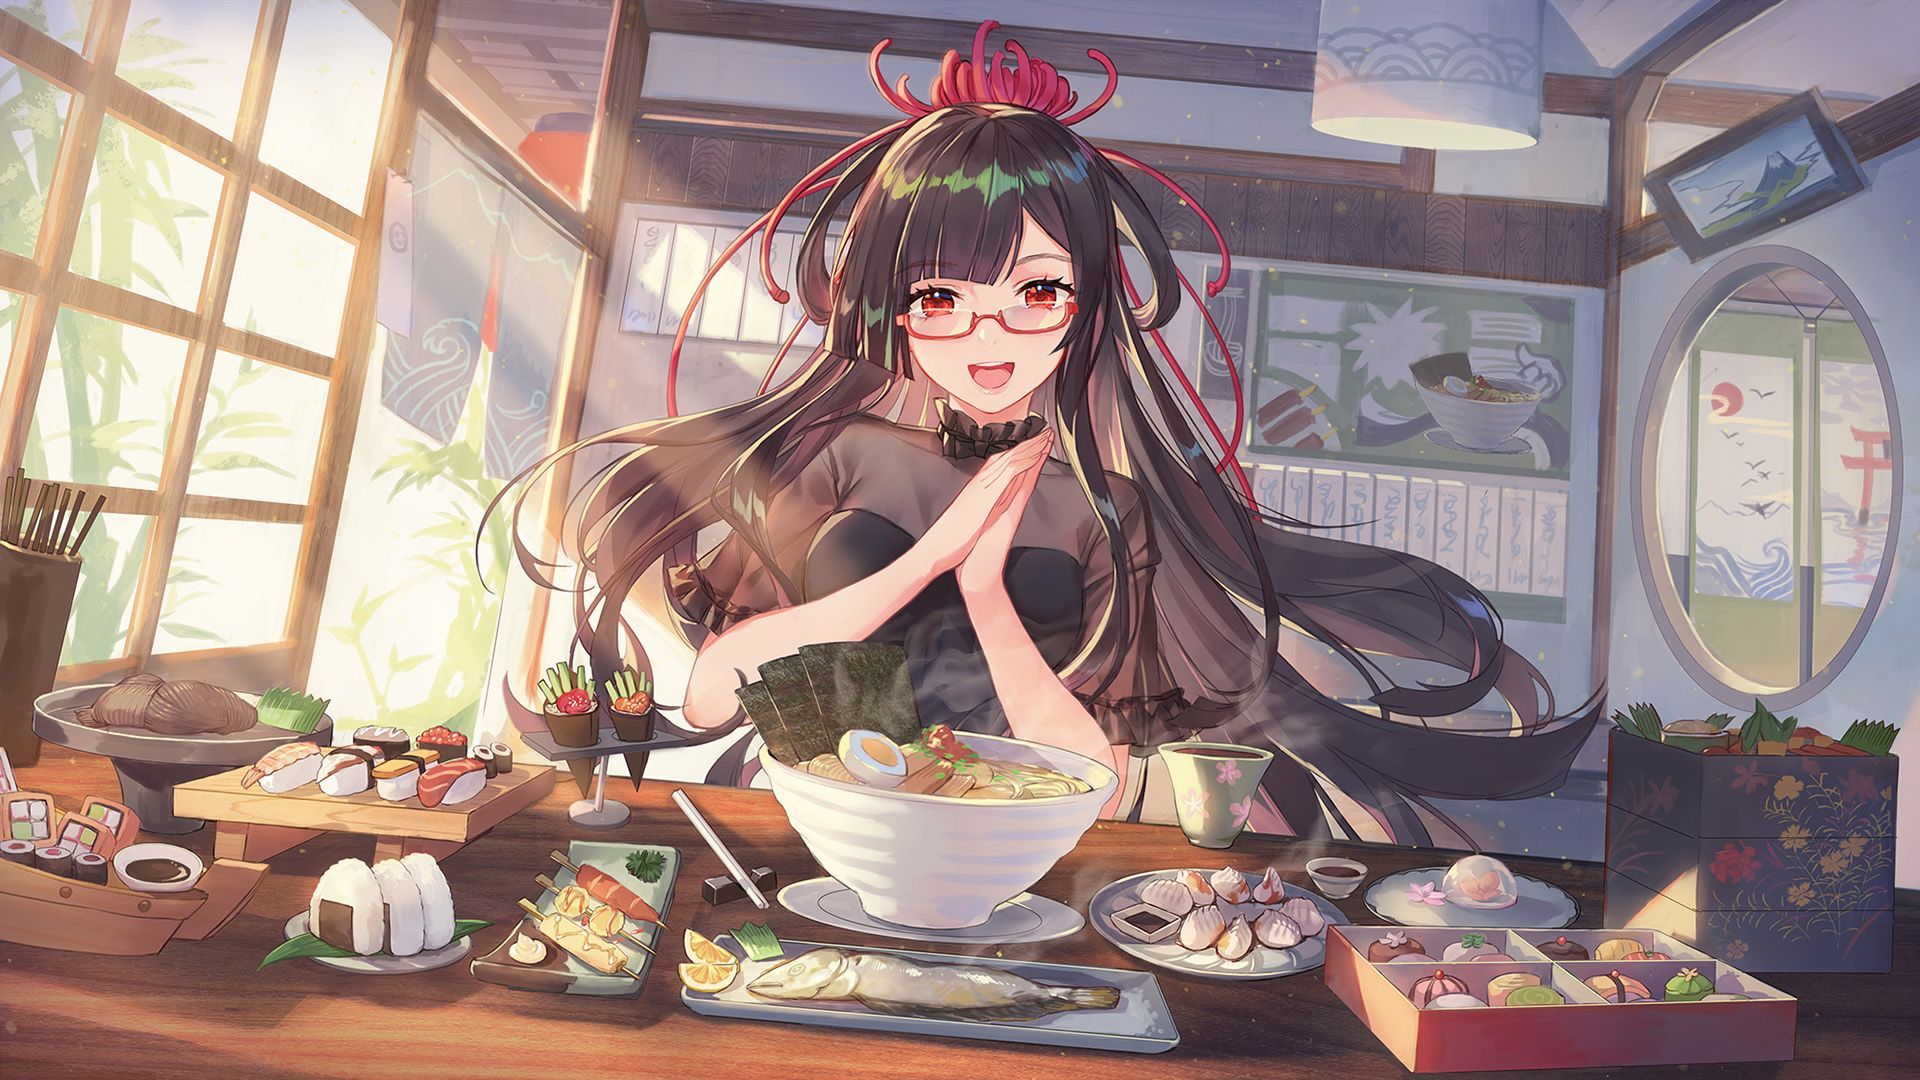 Download Free 100 + kitchen anime Wallpapers